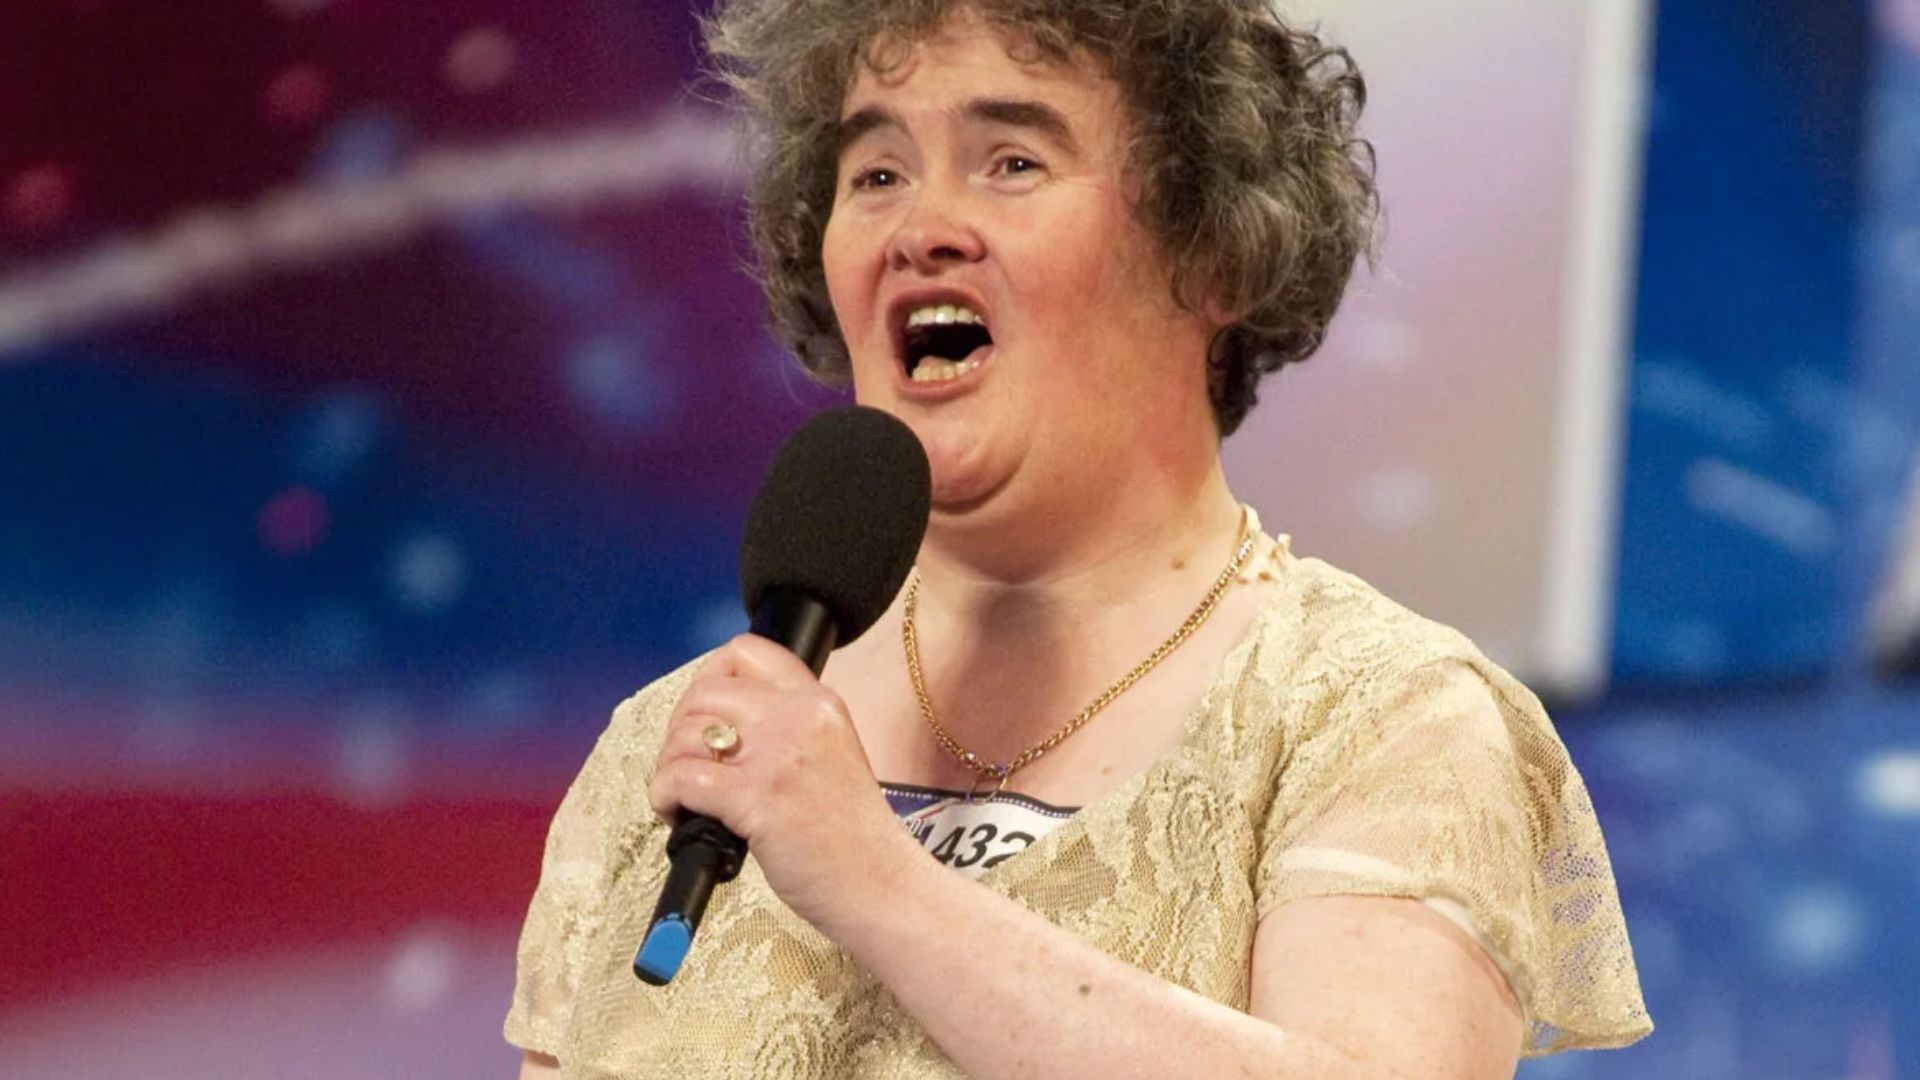 Susan Boyle  Holding A Mic And Singing A Song